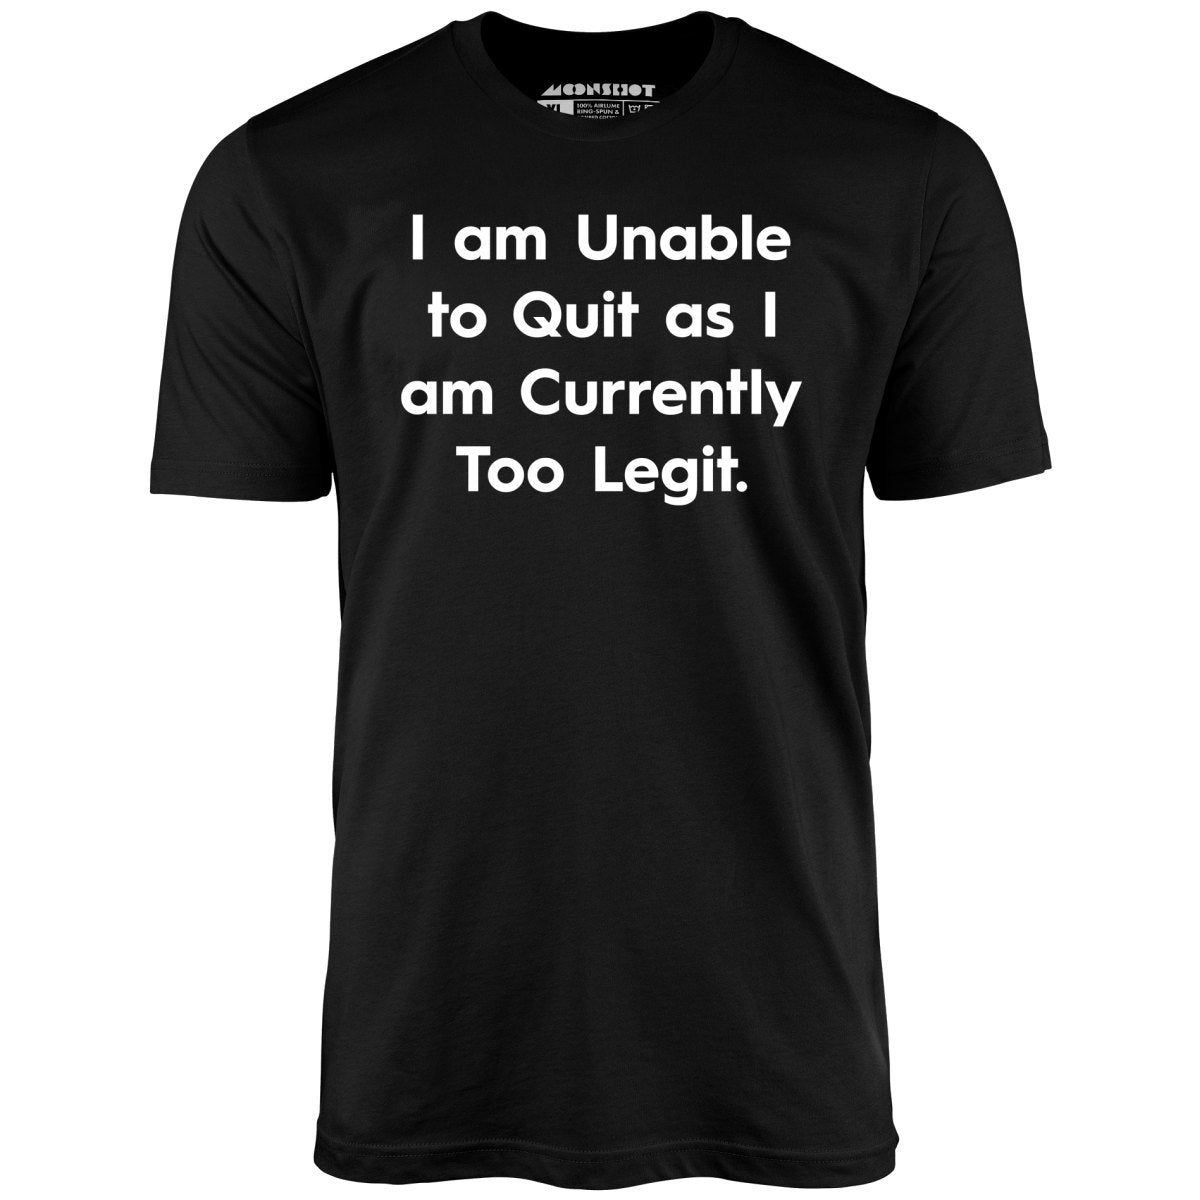 I am Unable to Quit as I am Currently Too Legit - Unisex T-Shirt